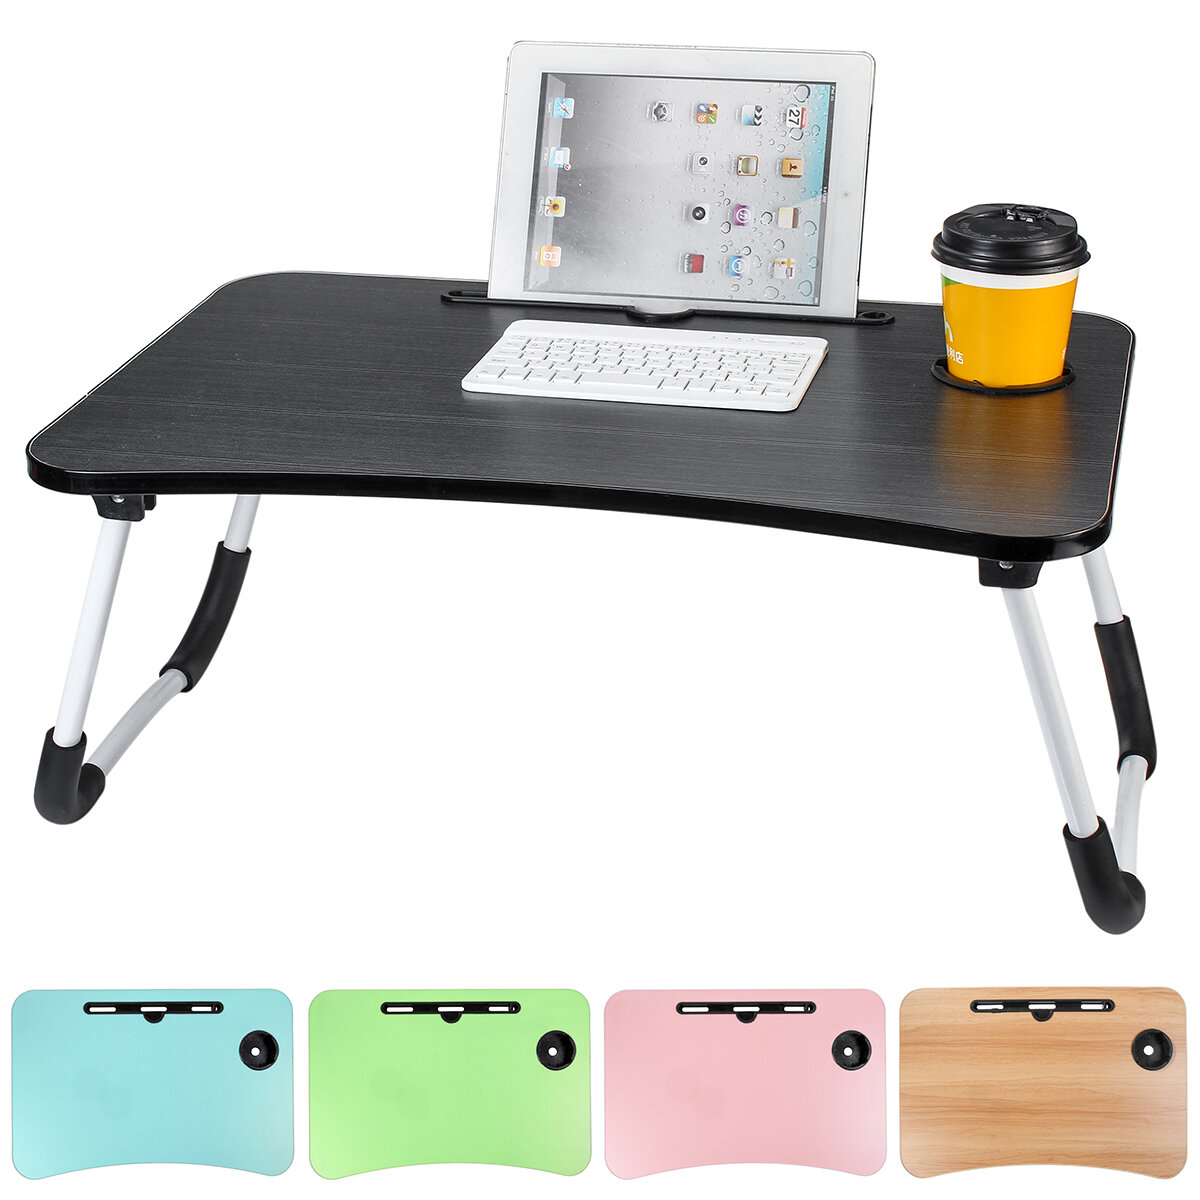 Image of 60 x 40 x 28cm Bed Tray Desk Folding Computer Desk With Card Slot And Cup Holder